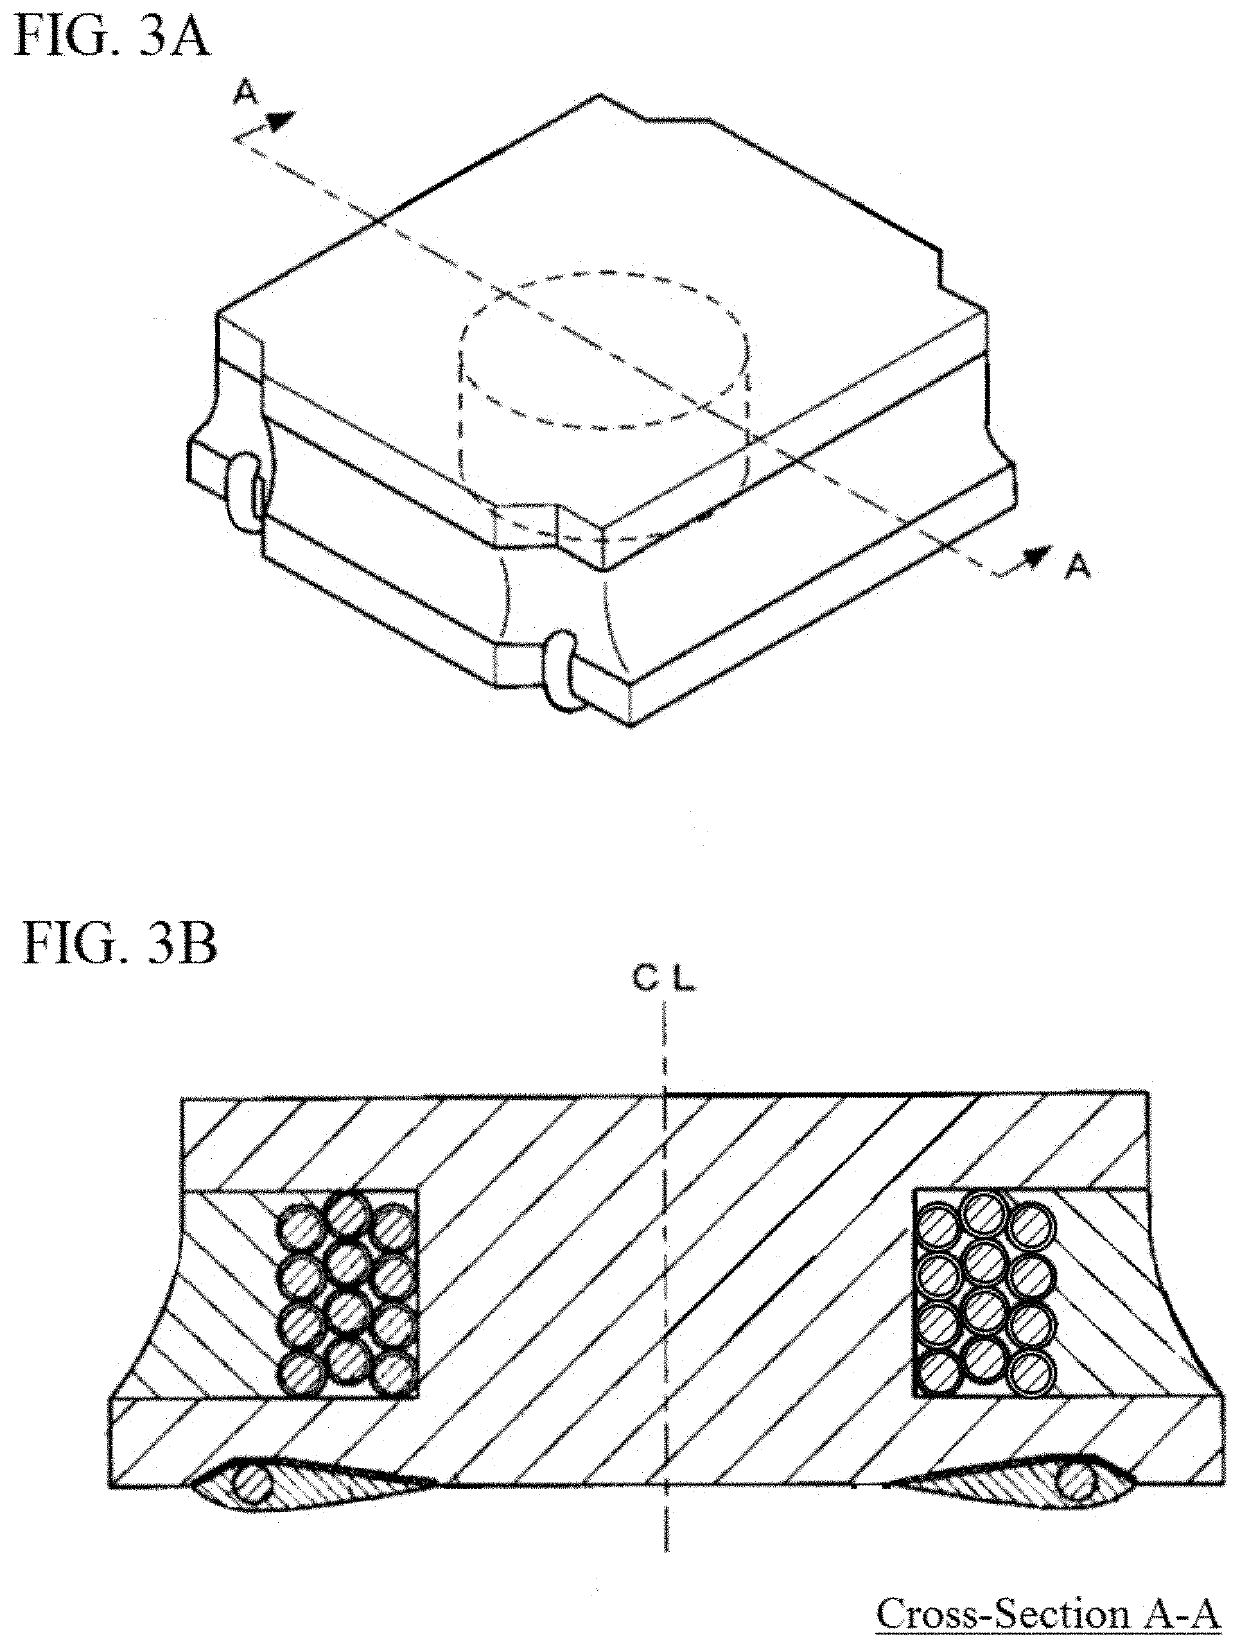 Soft magnetic alloy powder and method for manufacturing same, as well as coil component made from soft magnetic alloy powder and circuit board carrying same